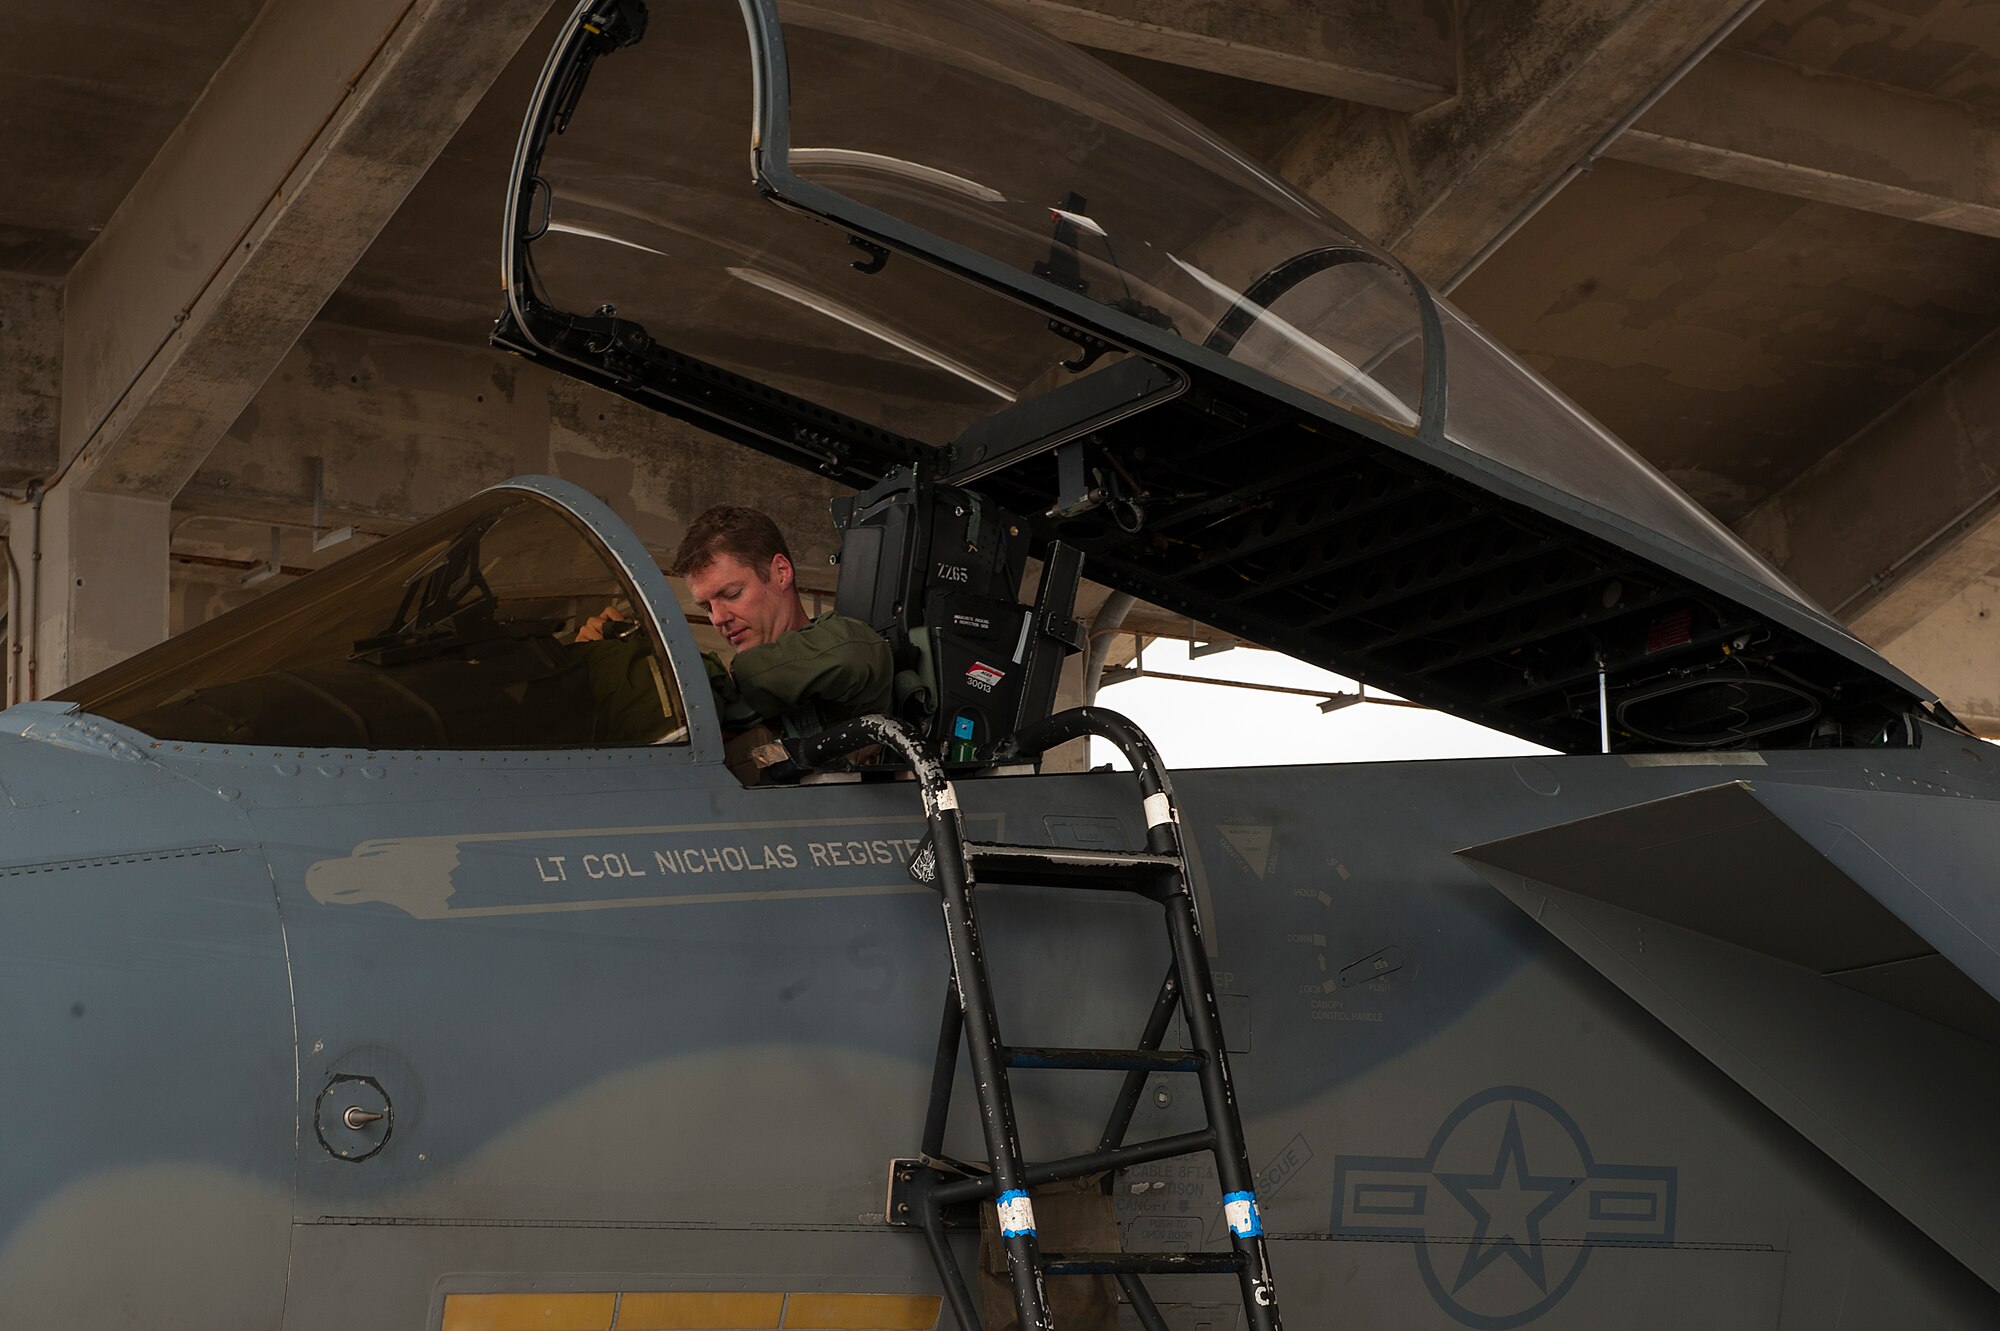 U.S. Air Force Lt. Col. Alexander Haddad, 44th Fighter Squadron pilot, exits an F-15 Eagle after reaching 2,000 flying hours Nov. 19, 2015, at Kadena Air Base, Japan. Lt. Col. Haddad is the fifth Kadena F-15 pilot to reach 2,000 flying hours since 2009. (U.S. Air Force photo by Airman 1st Class Corey M. Pettis)